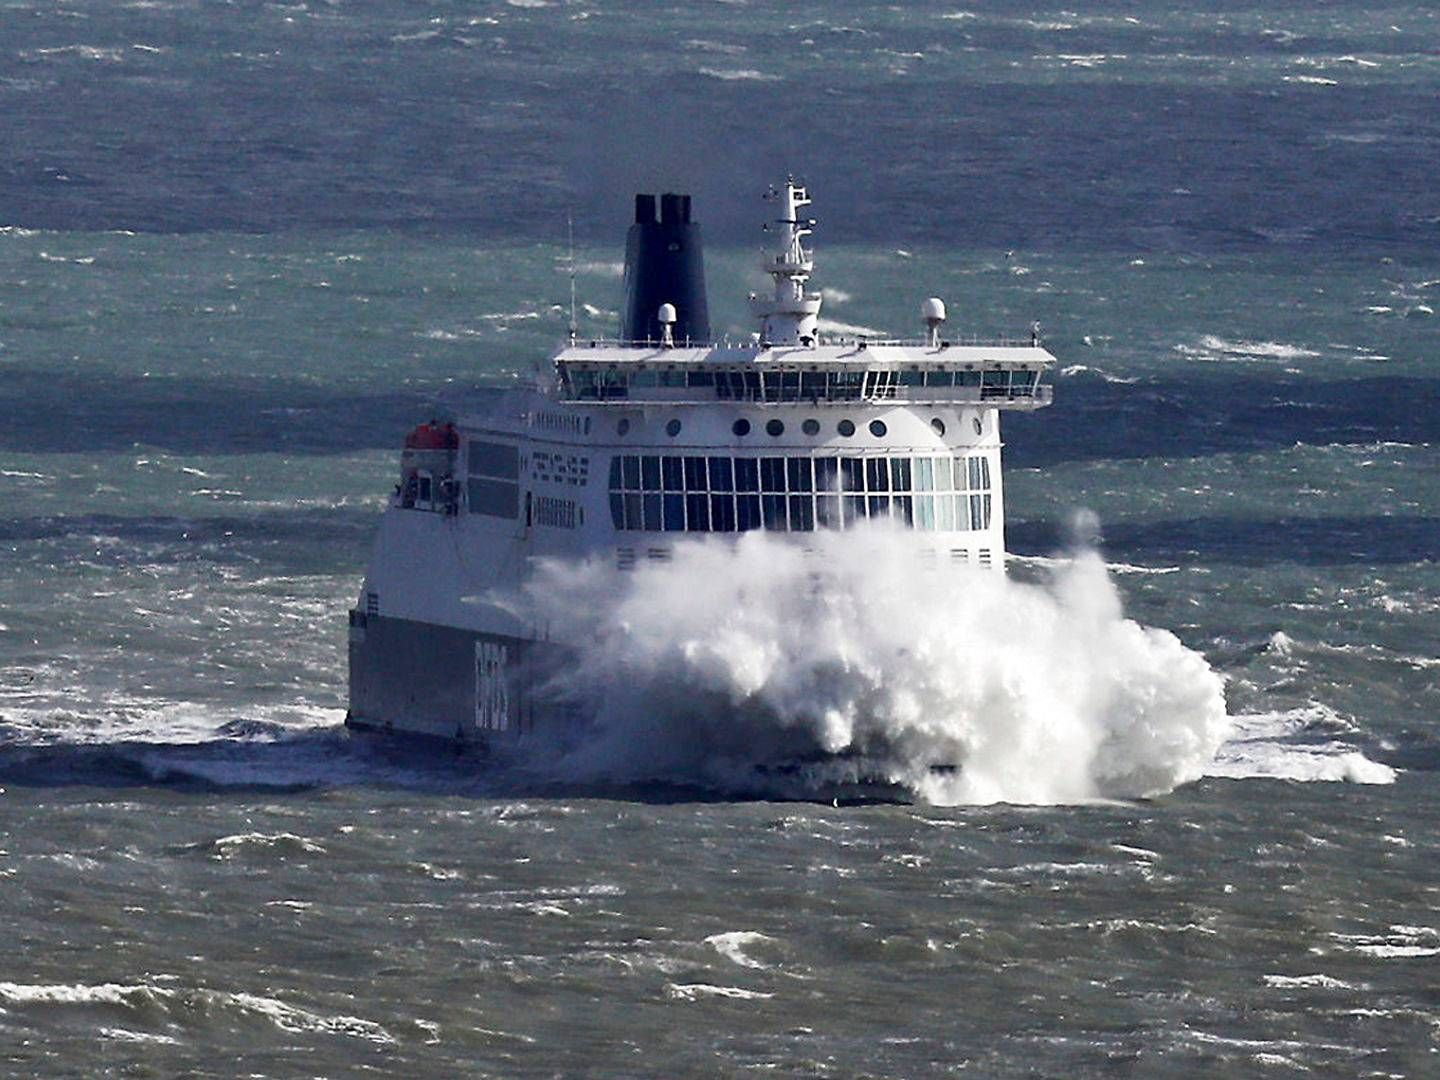 The new contracts will increase capacity outside the main routes, Dover-Calais and Dunkirk-Boulogne. | Photo: Gareth Fuller / AP / Ritzau Scanpix